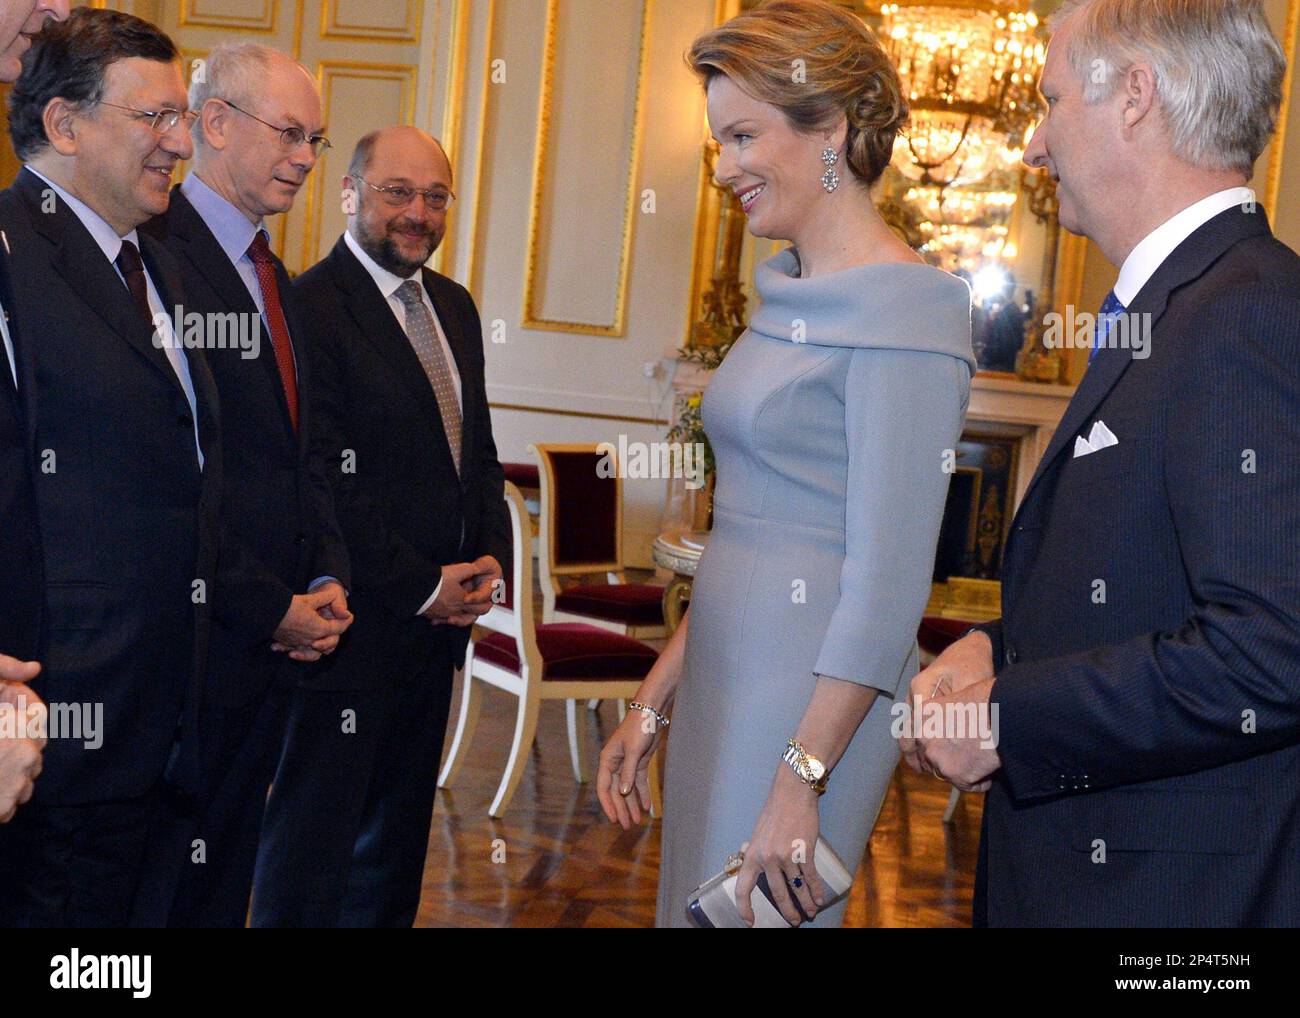 Belgium's King Philippe, right, and Queen Mathilde, second right, talk with with European Commission President Jose Manuel Barroso, left, European Parliament President Martin Schulz, center, and European Council President Herman Van Rompuy, second left, during a New Year's reception at the Royal Palace in Brussels, Friday, Jan. 10, 2014. Belgium's King Philippe invited EU officials from all the EU institutions in Brussels for the annual New Year's reception. (AP Photo/Eric Lalmand, pool) Stock Photo